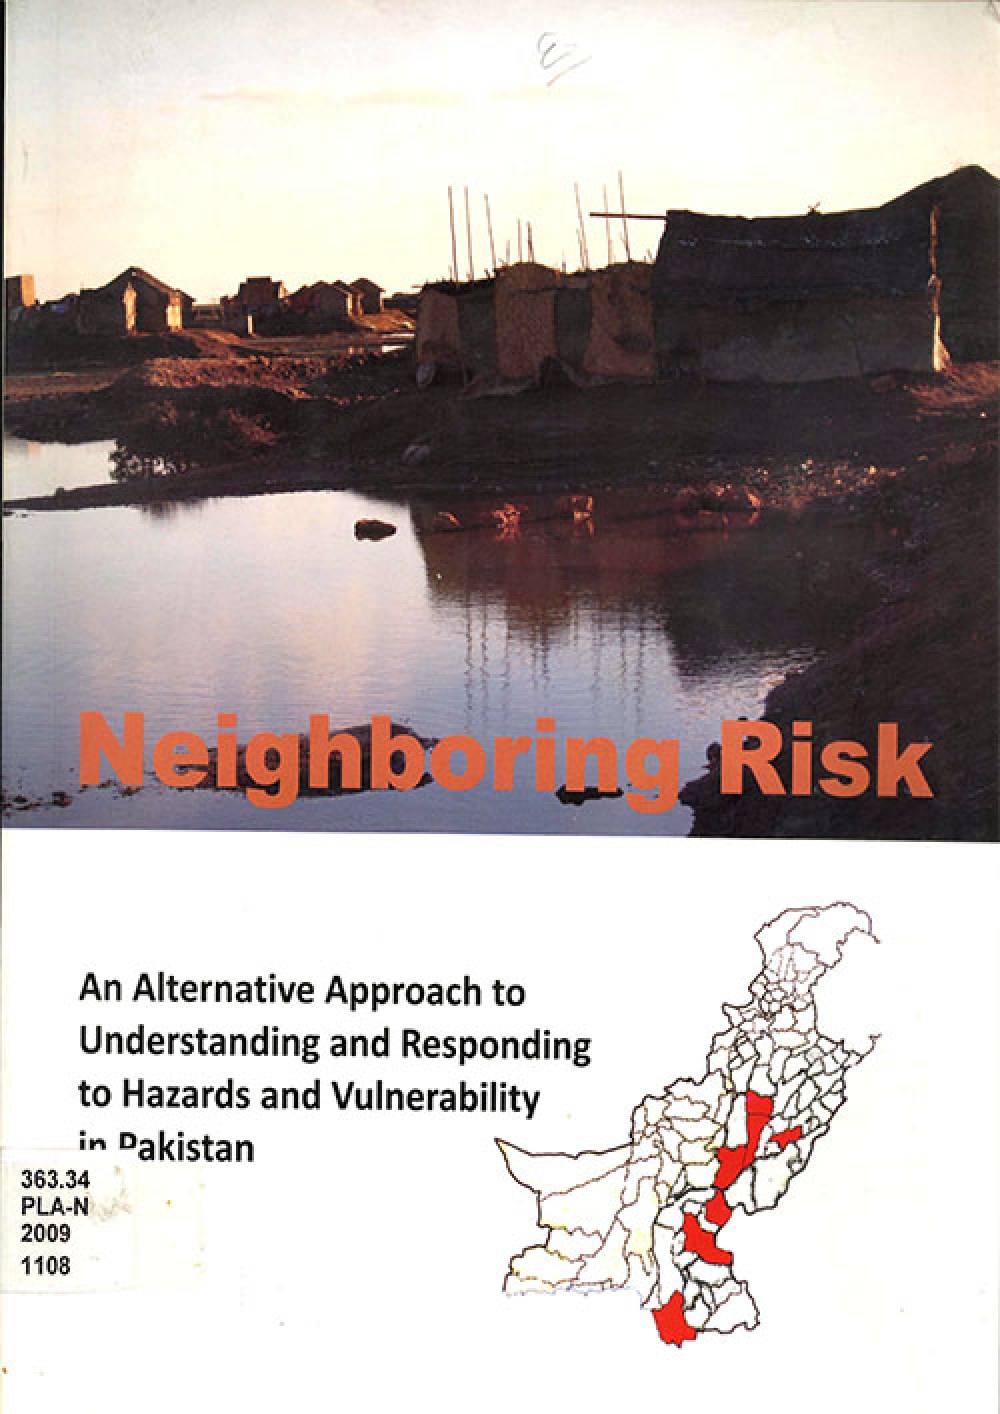 Neighboring Risk An Alternative Approach to Understanding and Responding to Hazards and Vulnerability in Pakistan